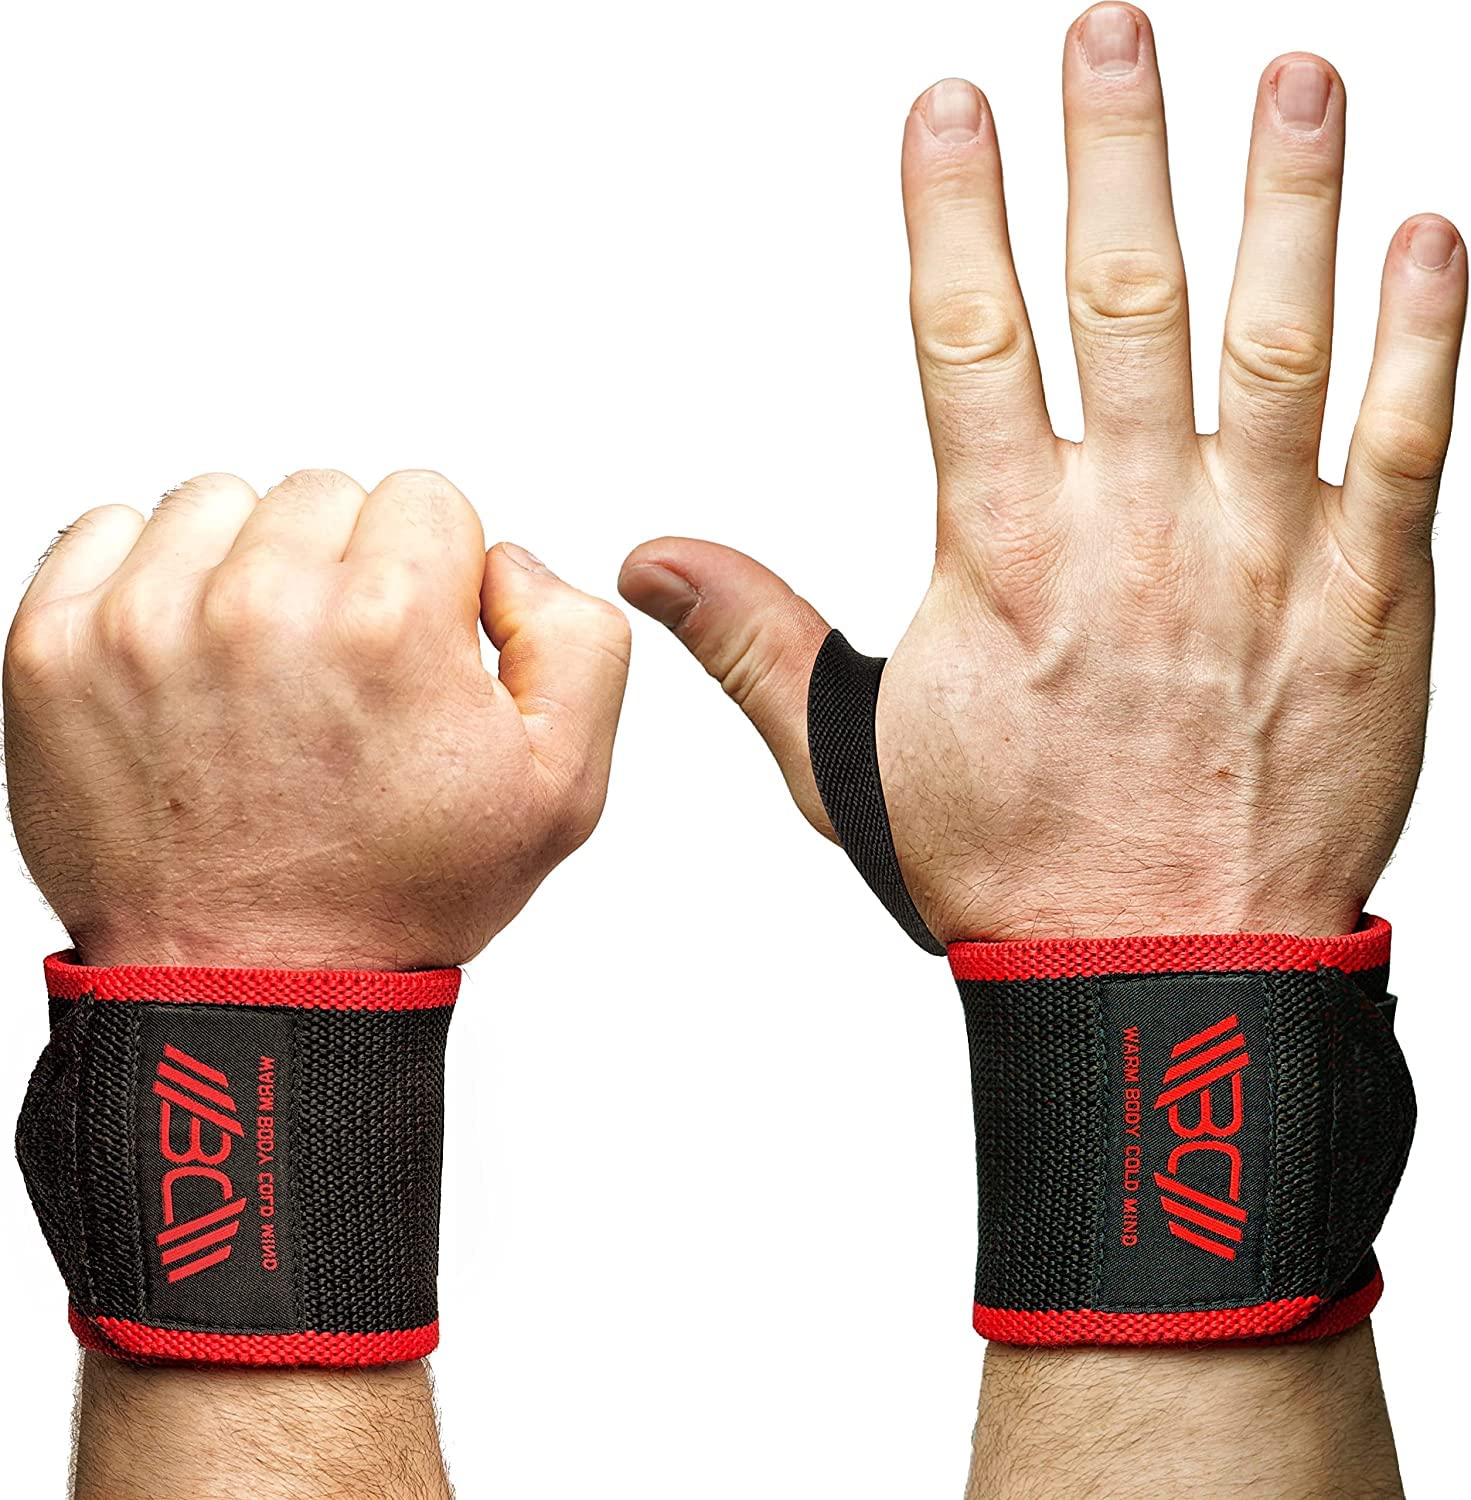 Fashion (Black-1Pair)1Pair Weight Lifting Straps With Wrist